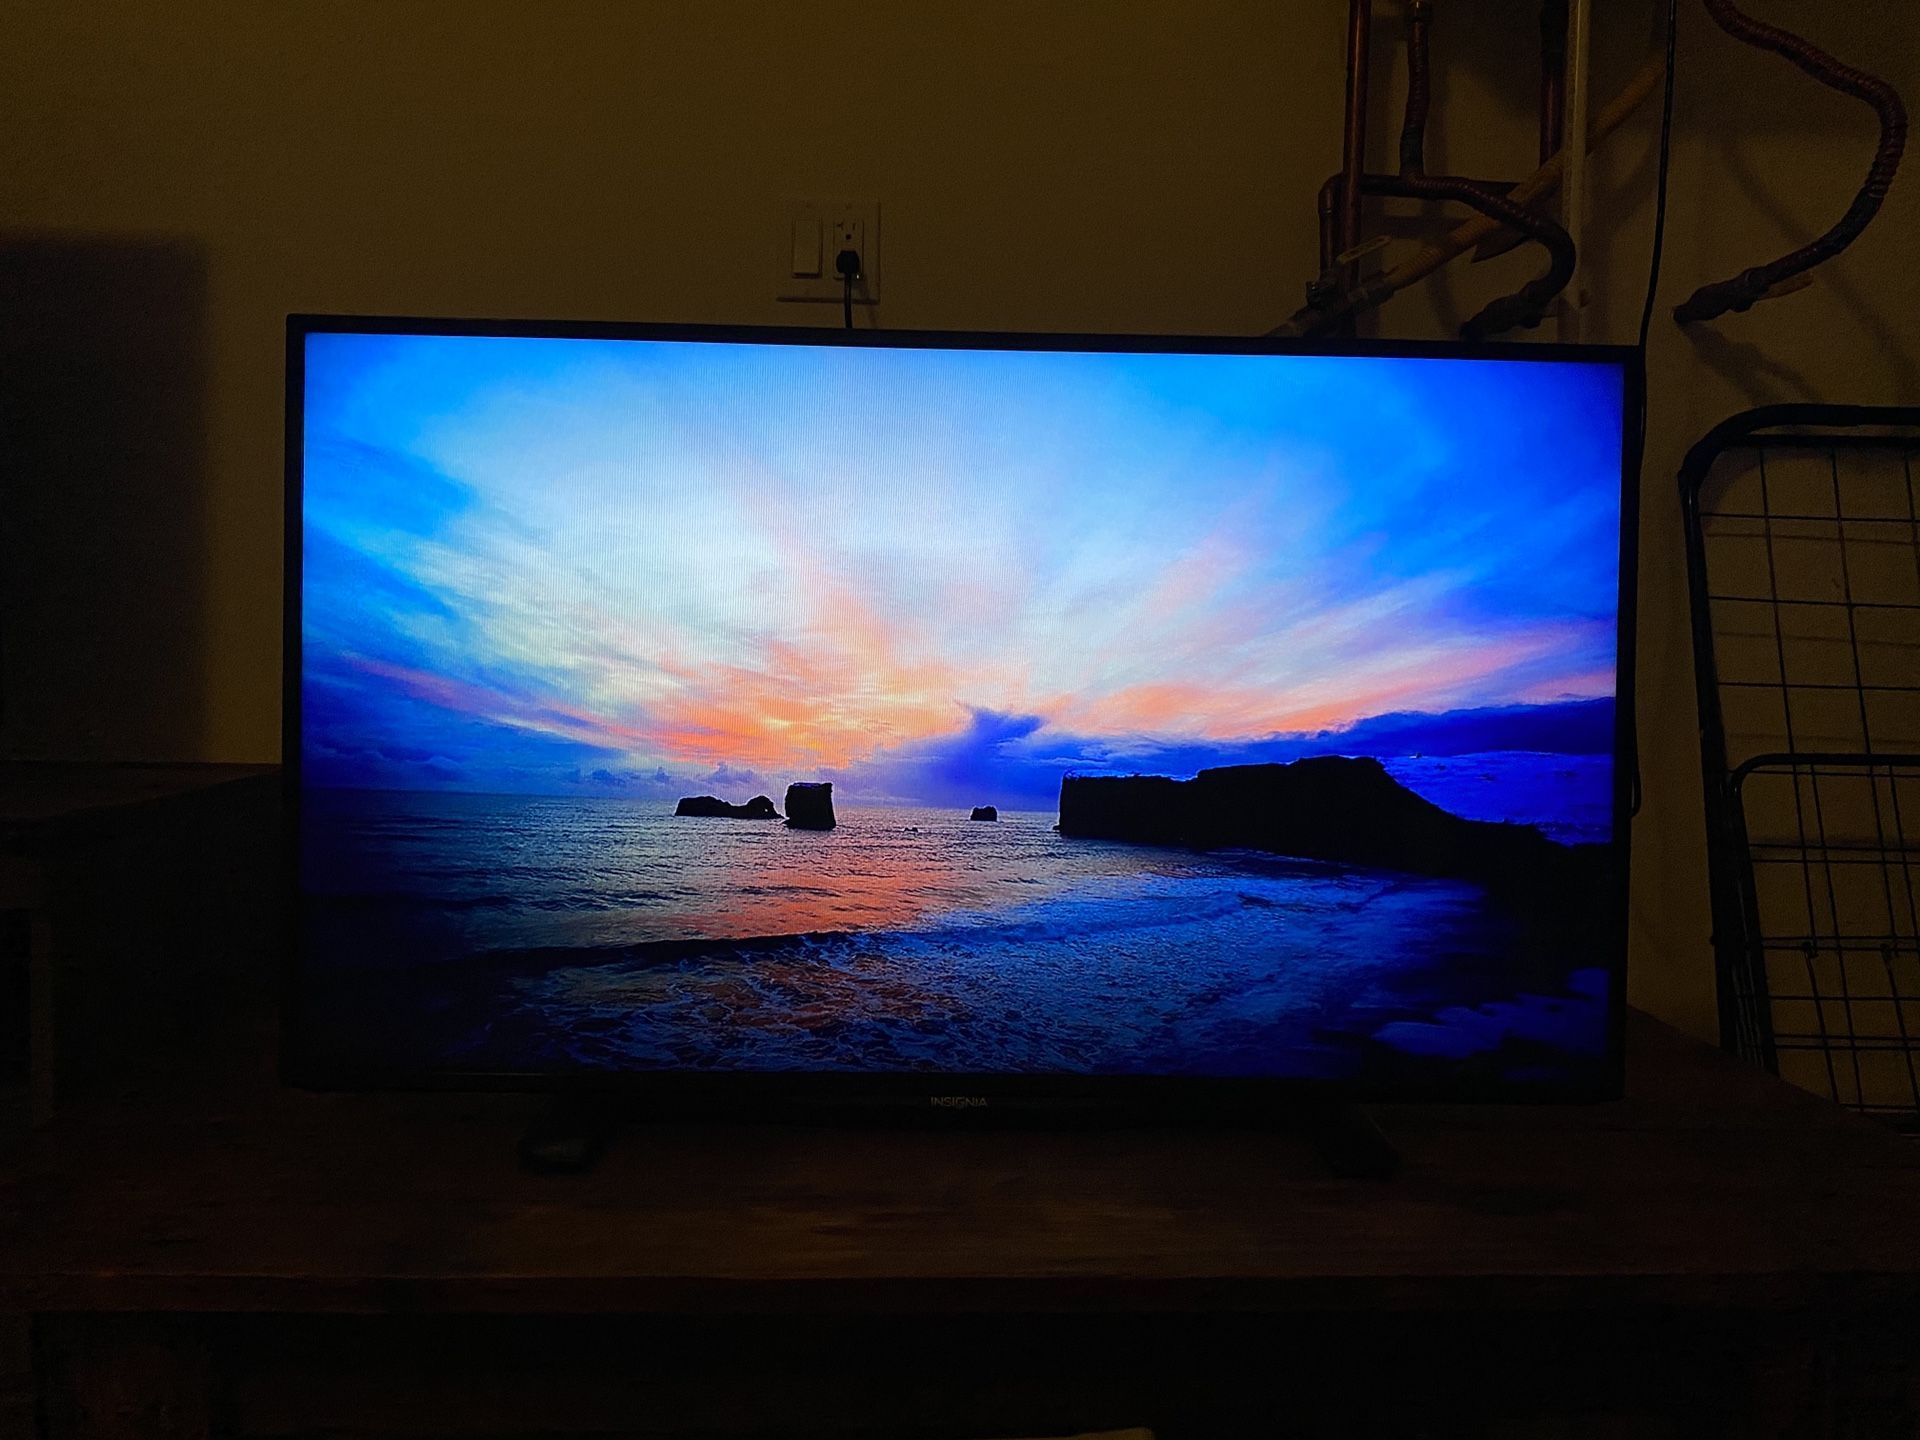 40” LED Insignia 1080p HDTV with wall mount